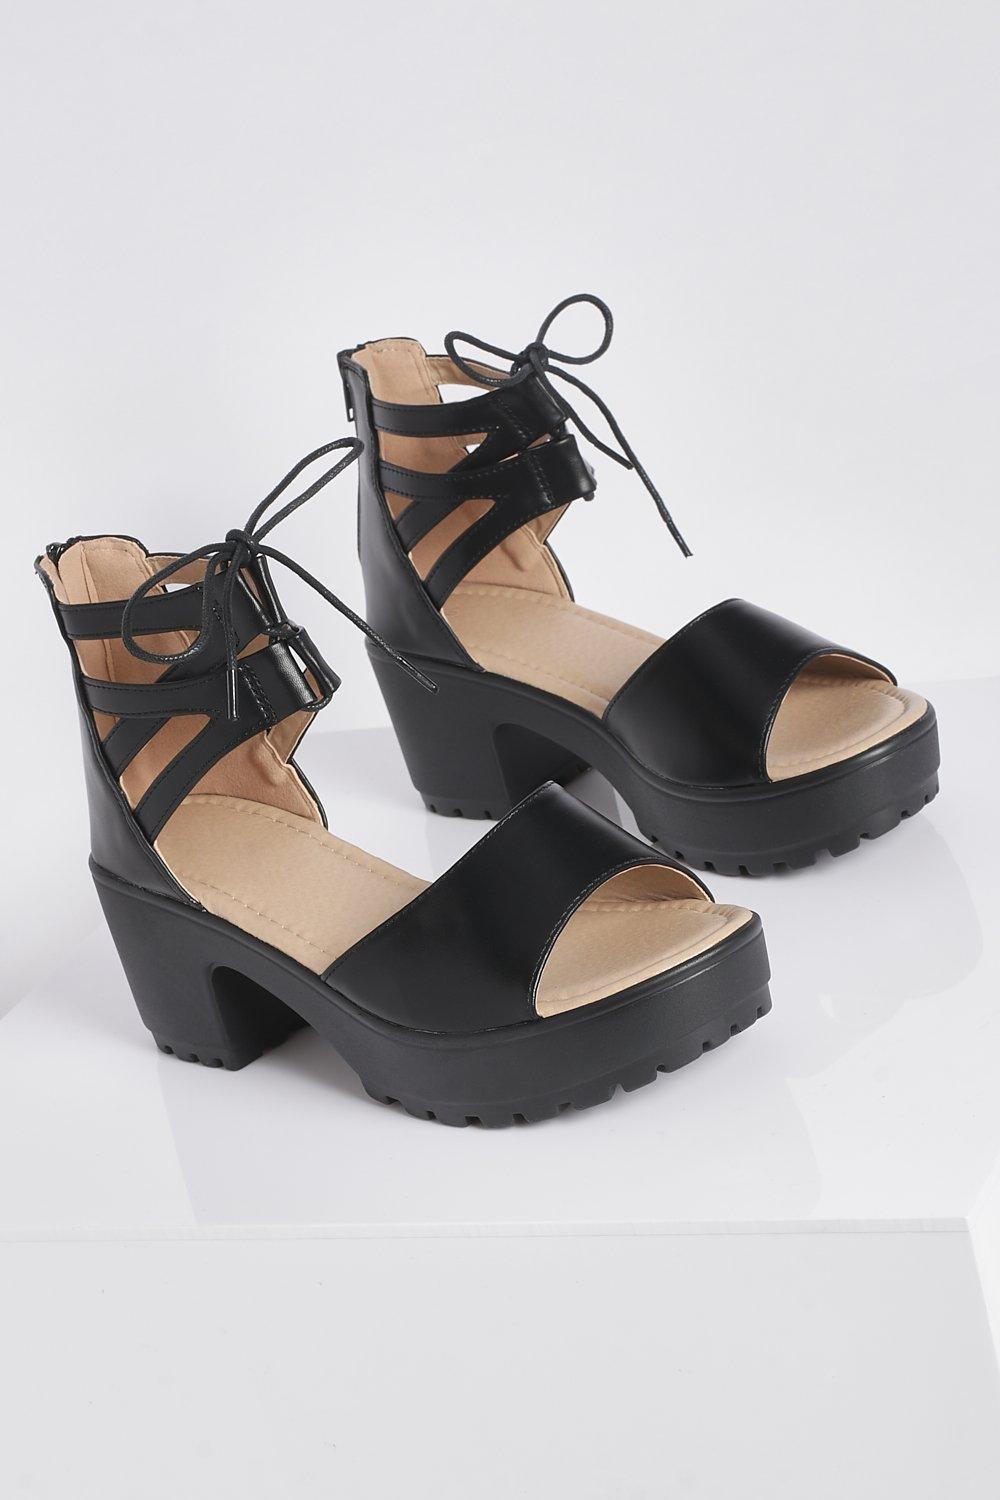 Boohoo Lace Up 2 Part Cleated Sandals in Black | Lyst